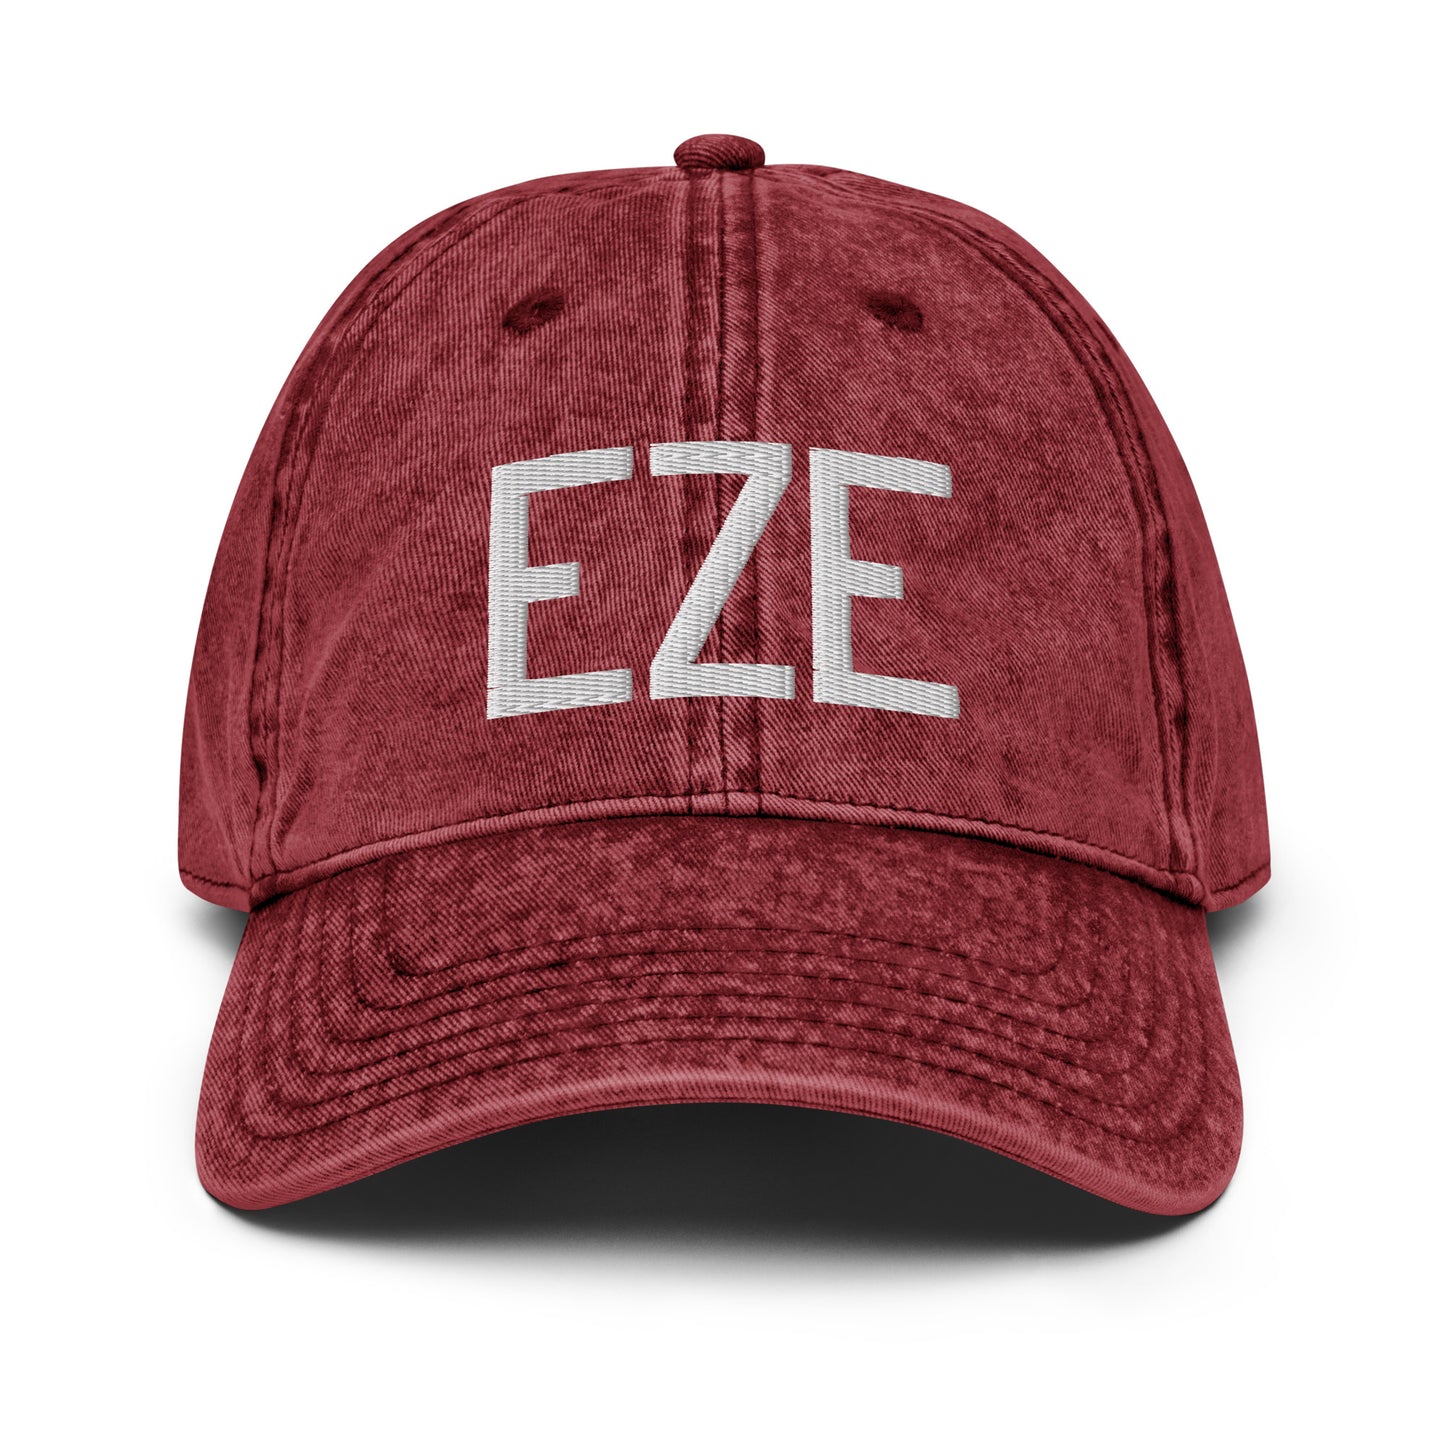 Airport Code Twill Cap - White • EZE Buenos Aires • YHM Designs - Image 19